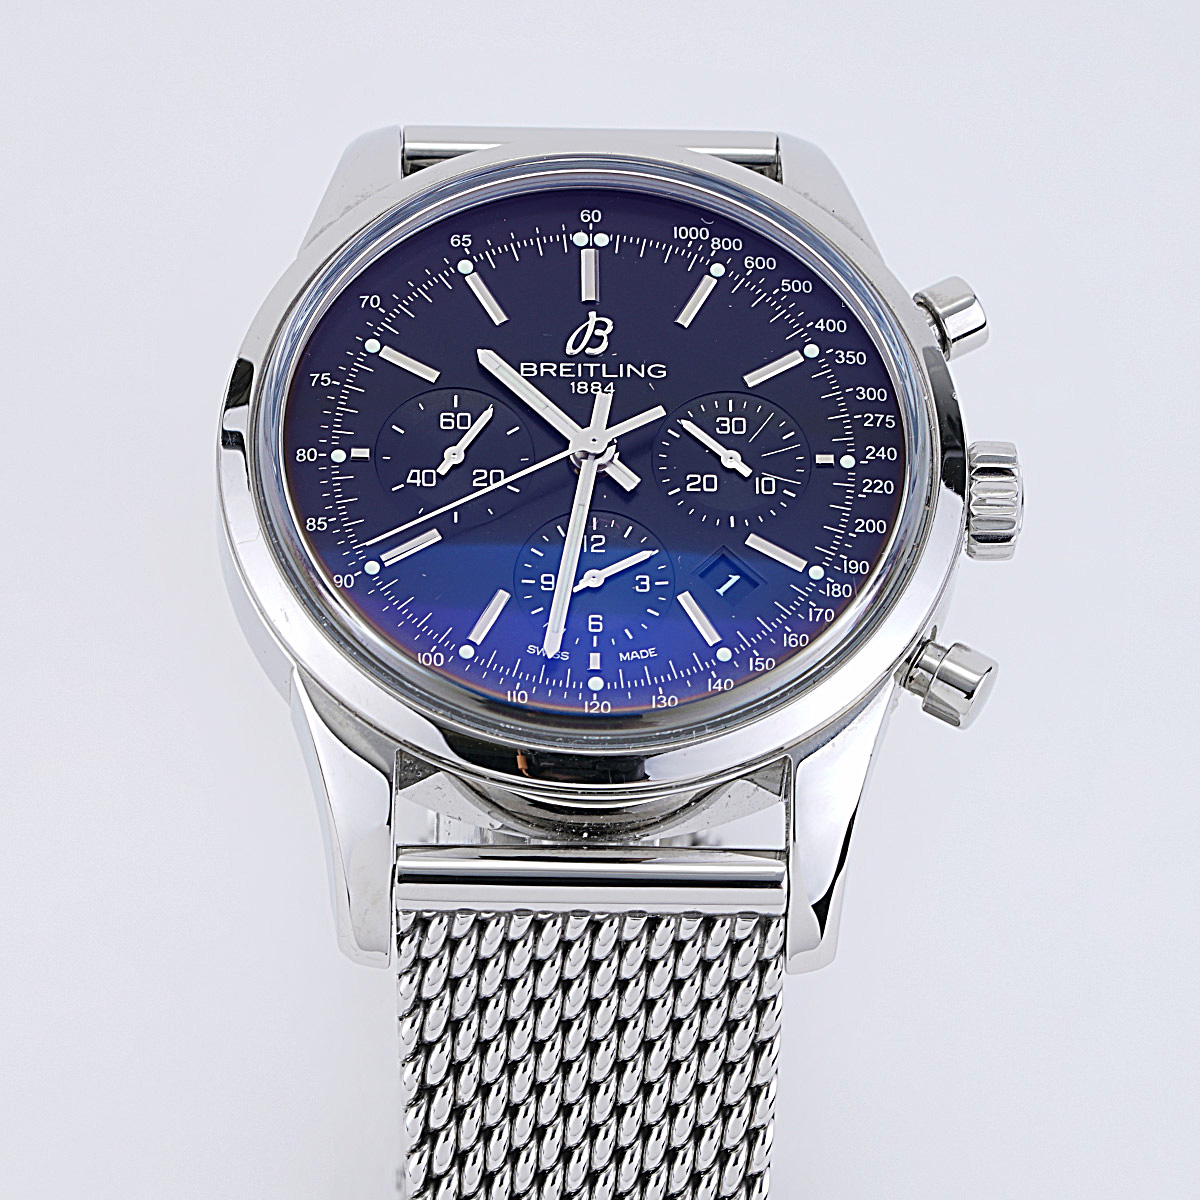 Breitling - Transocean Chronograph Limited Edition